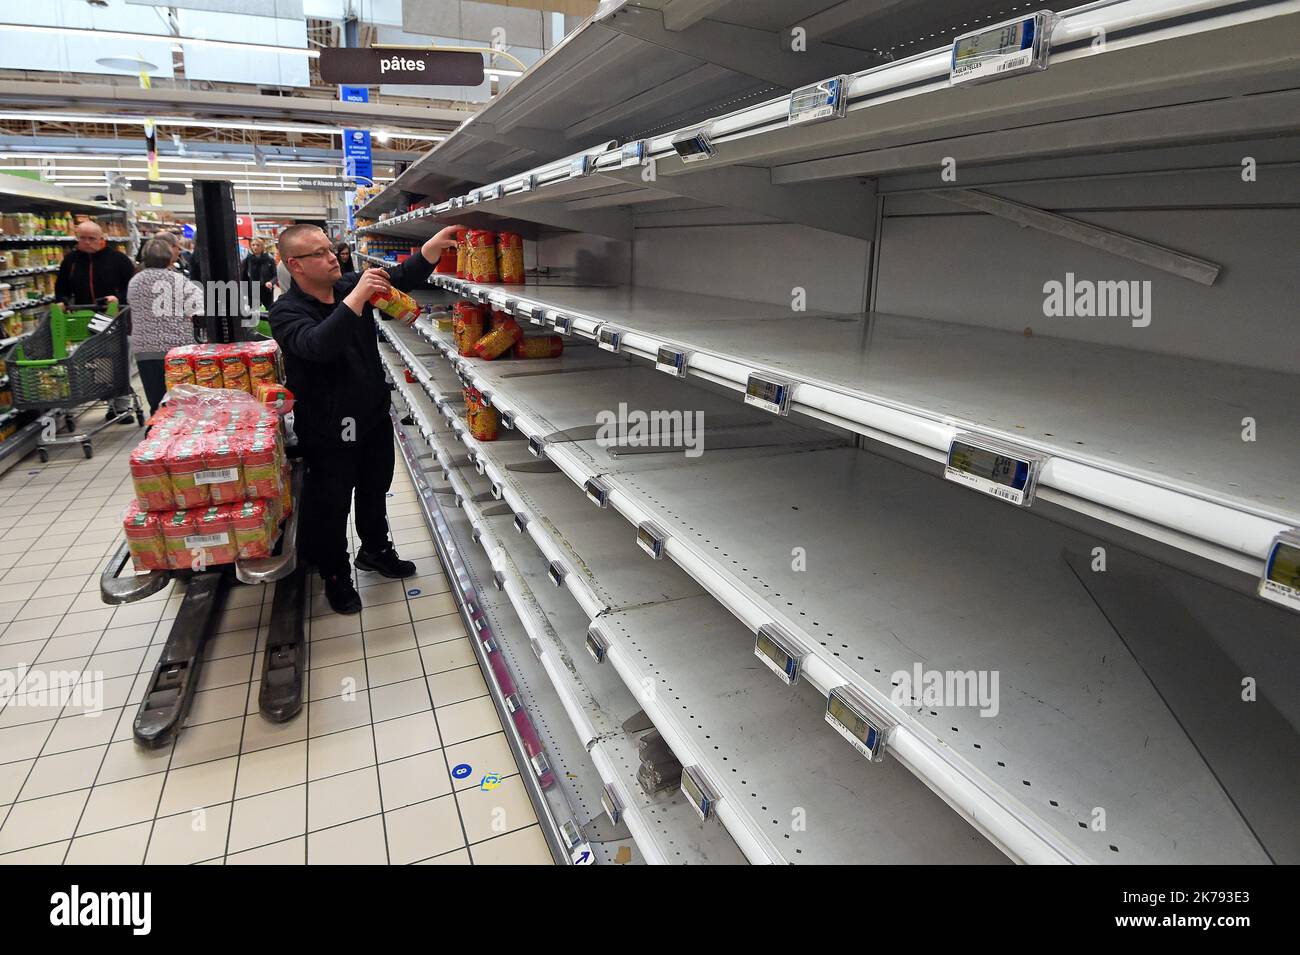 The pasta department of the Cora Houdemont shopping center has been robbed. Coronavirus panic-buying leading to empty shelves, and wait long lines   France march 14 2020 Stock Photo